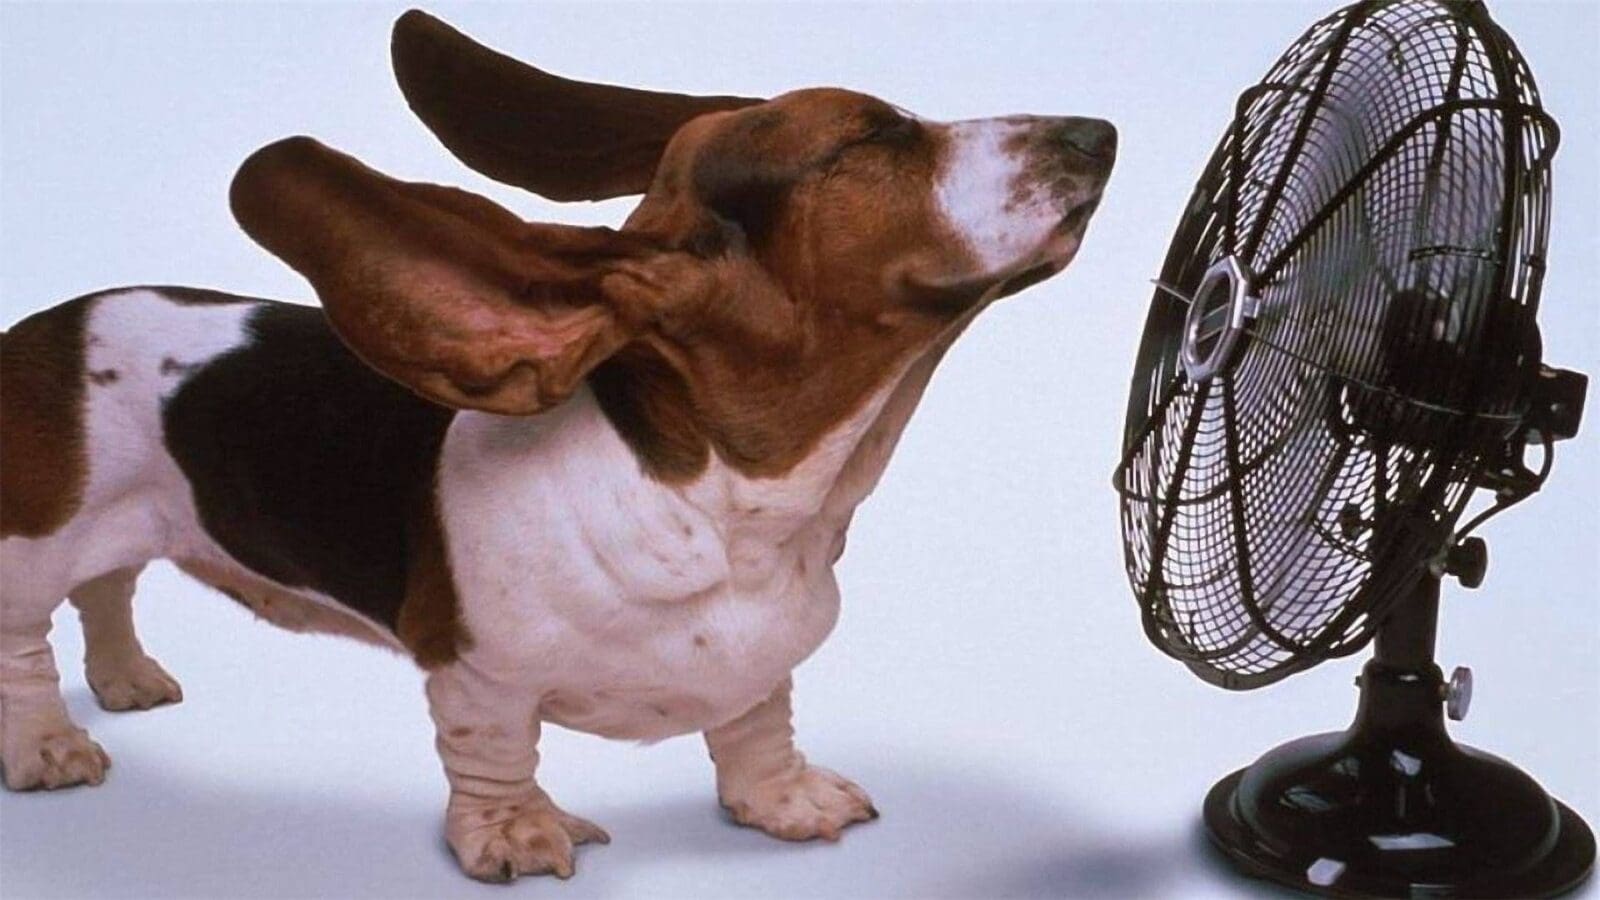 About A Dog and Fan By Brian Schnee